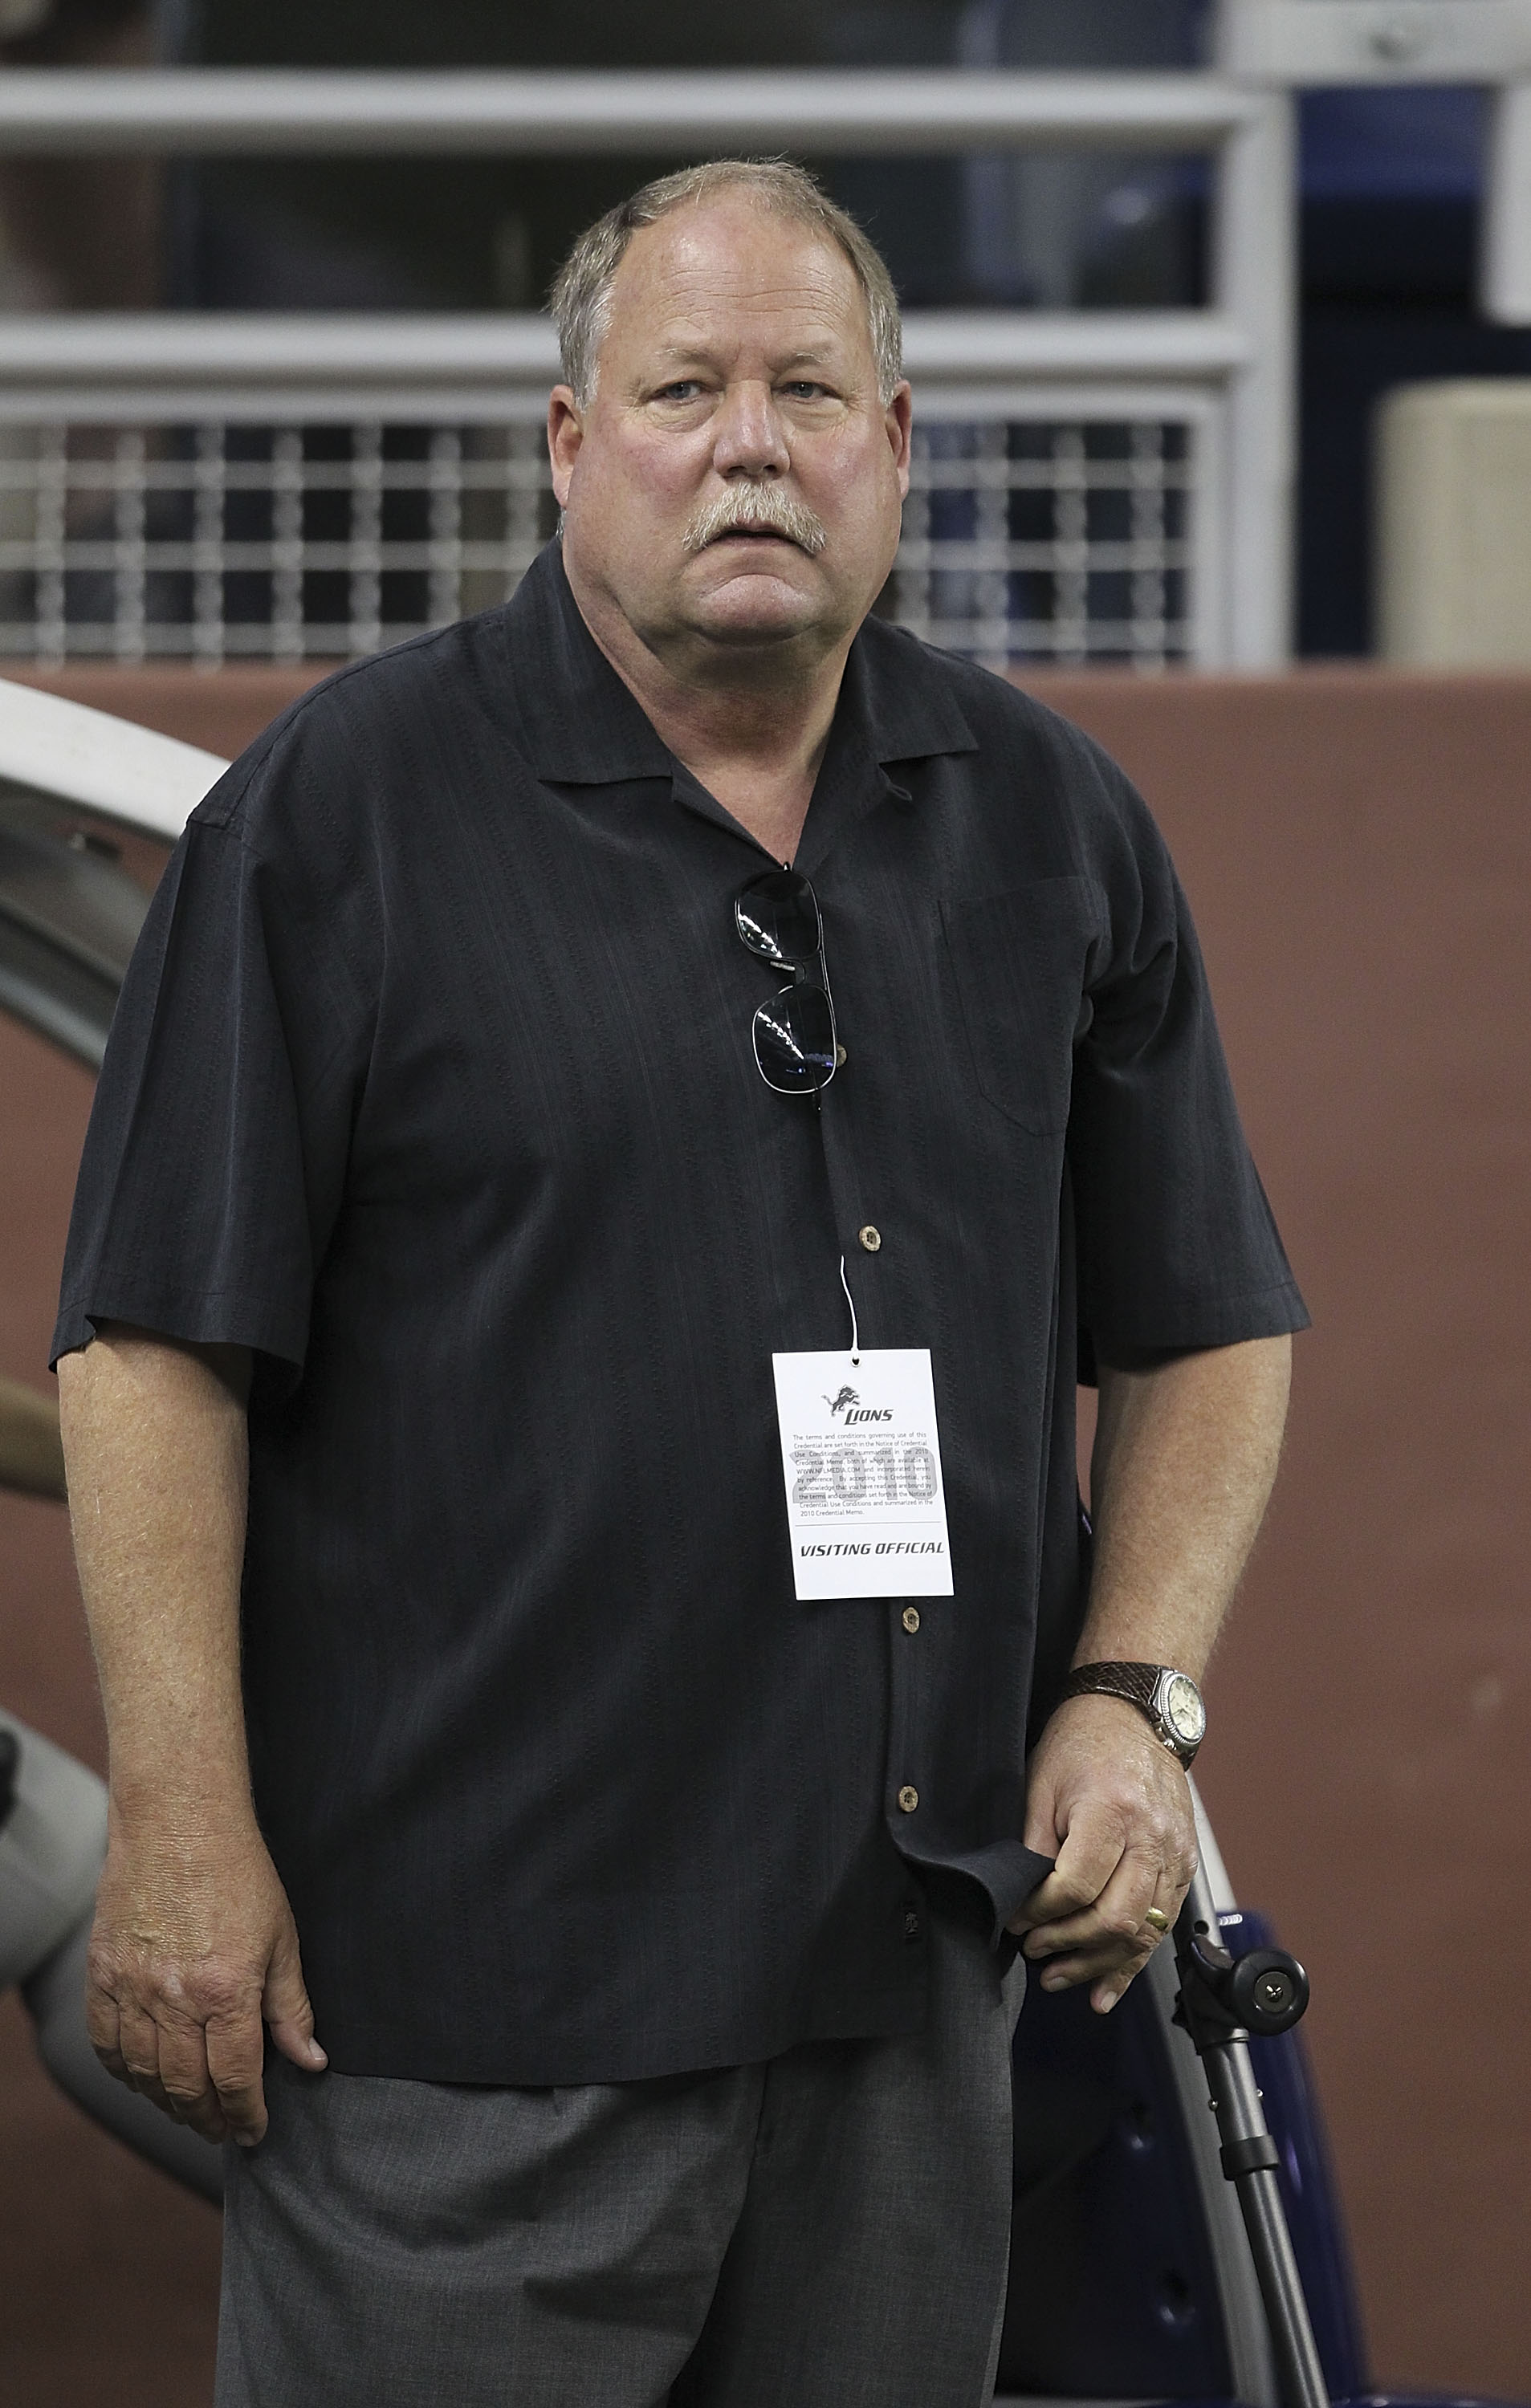 DETROIT - AUGUST 28: Mike Holmgren President of the Cleveland Browns watches the action prior to the start of the preseason game against the Detroit Lions at Ford Field on August 28, 2010 in Detroit, Michigan. (Photo by Leon Halip/Getty Images)